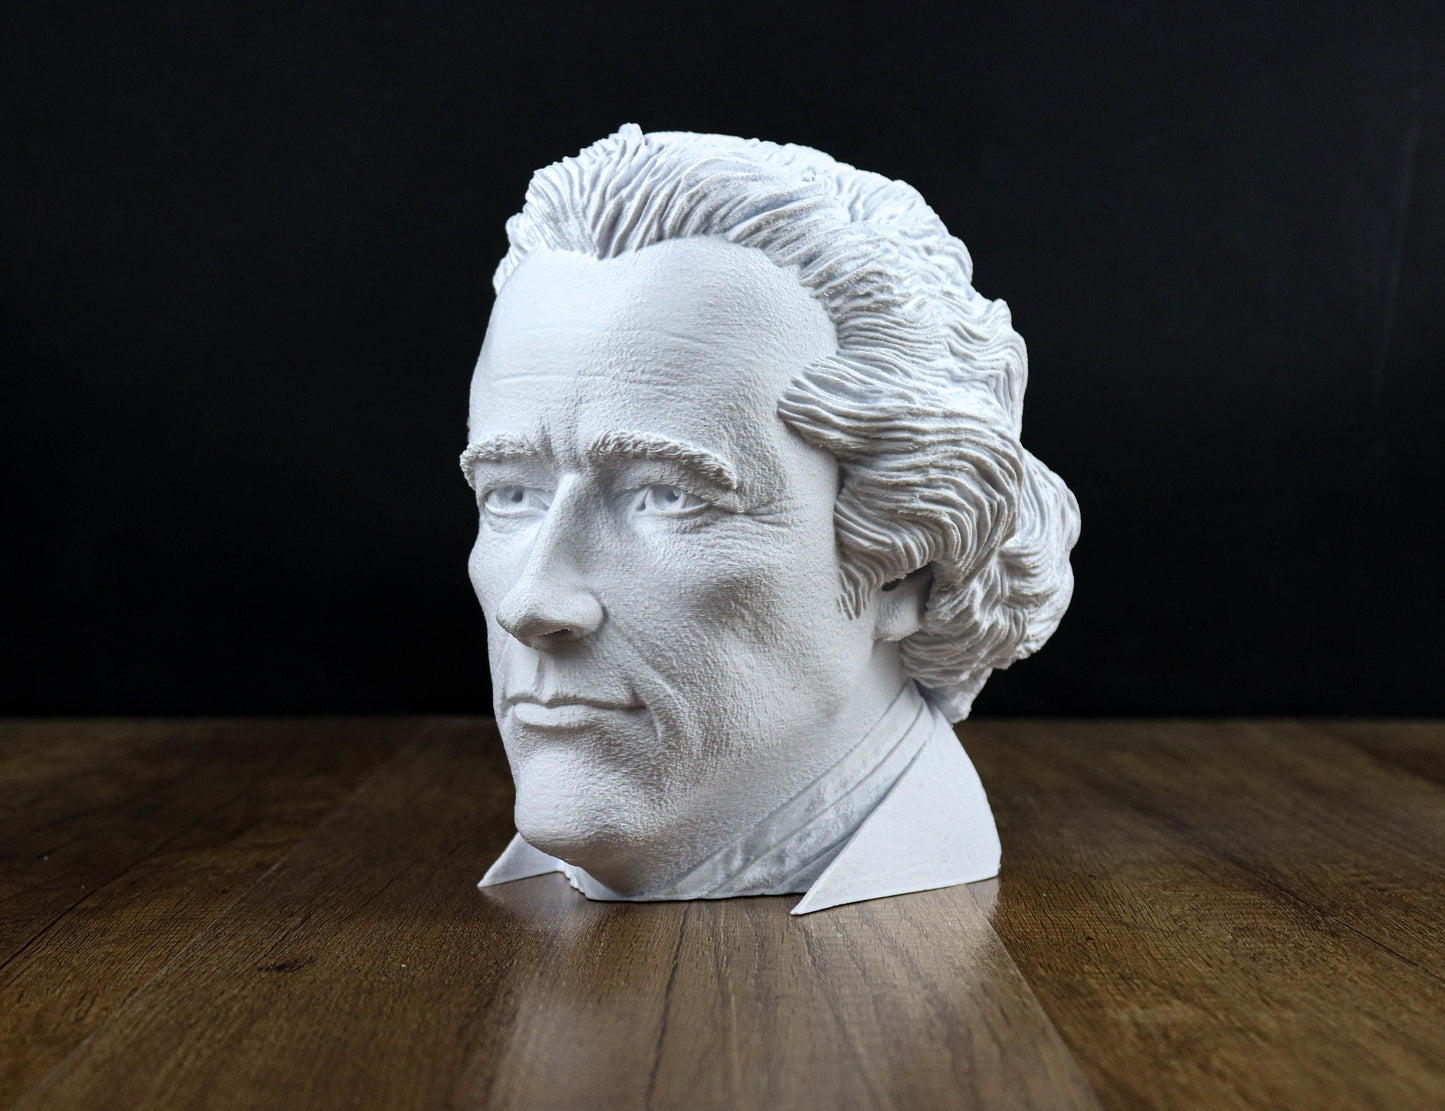 Alexander Hamilton Bust, Founding Father of the United States Sculpture, Headphone Holder Decoration